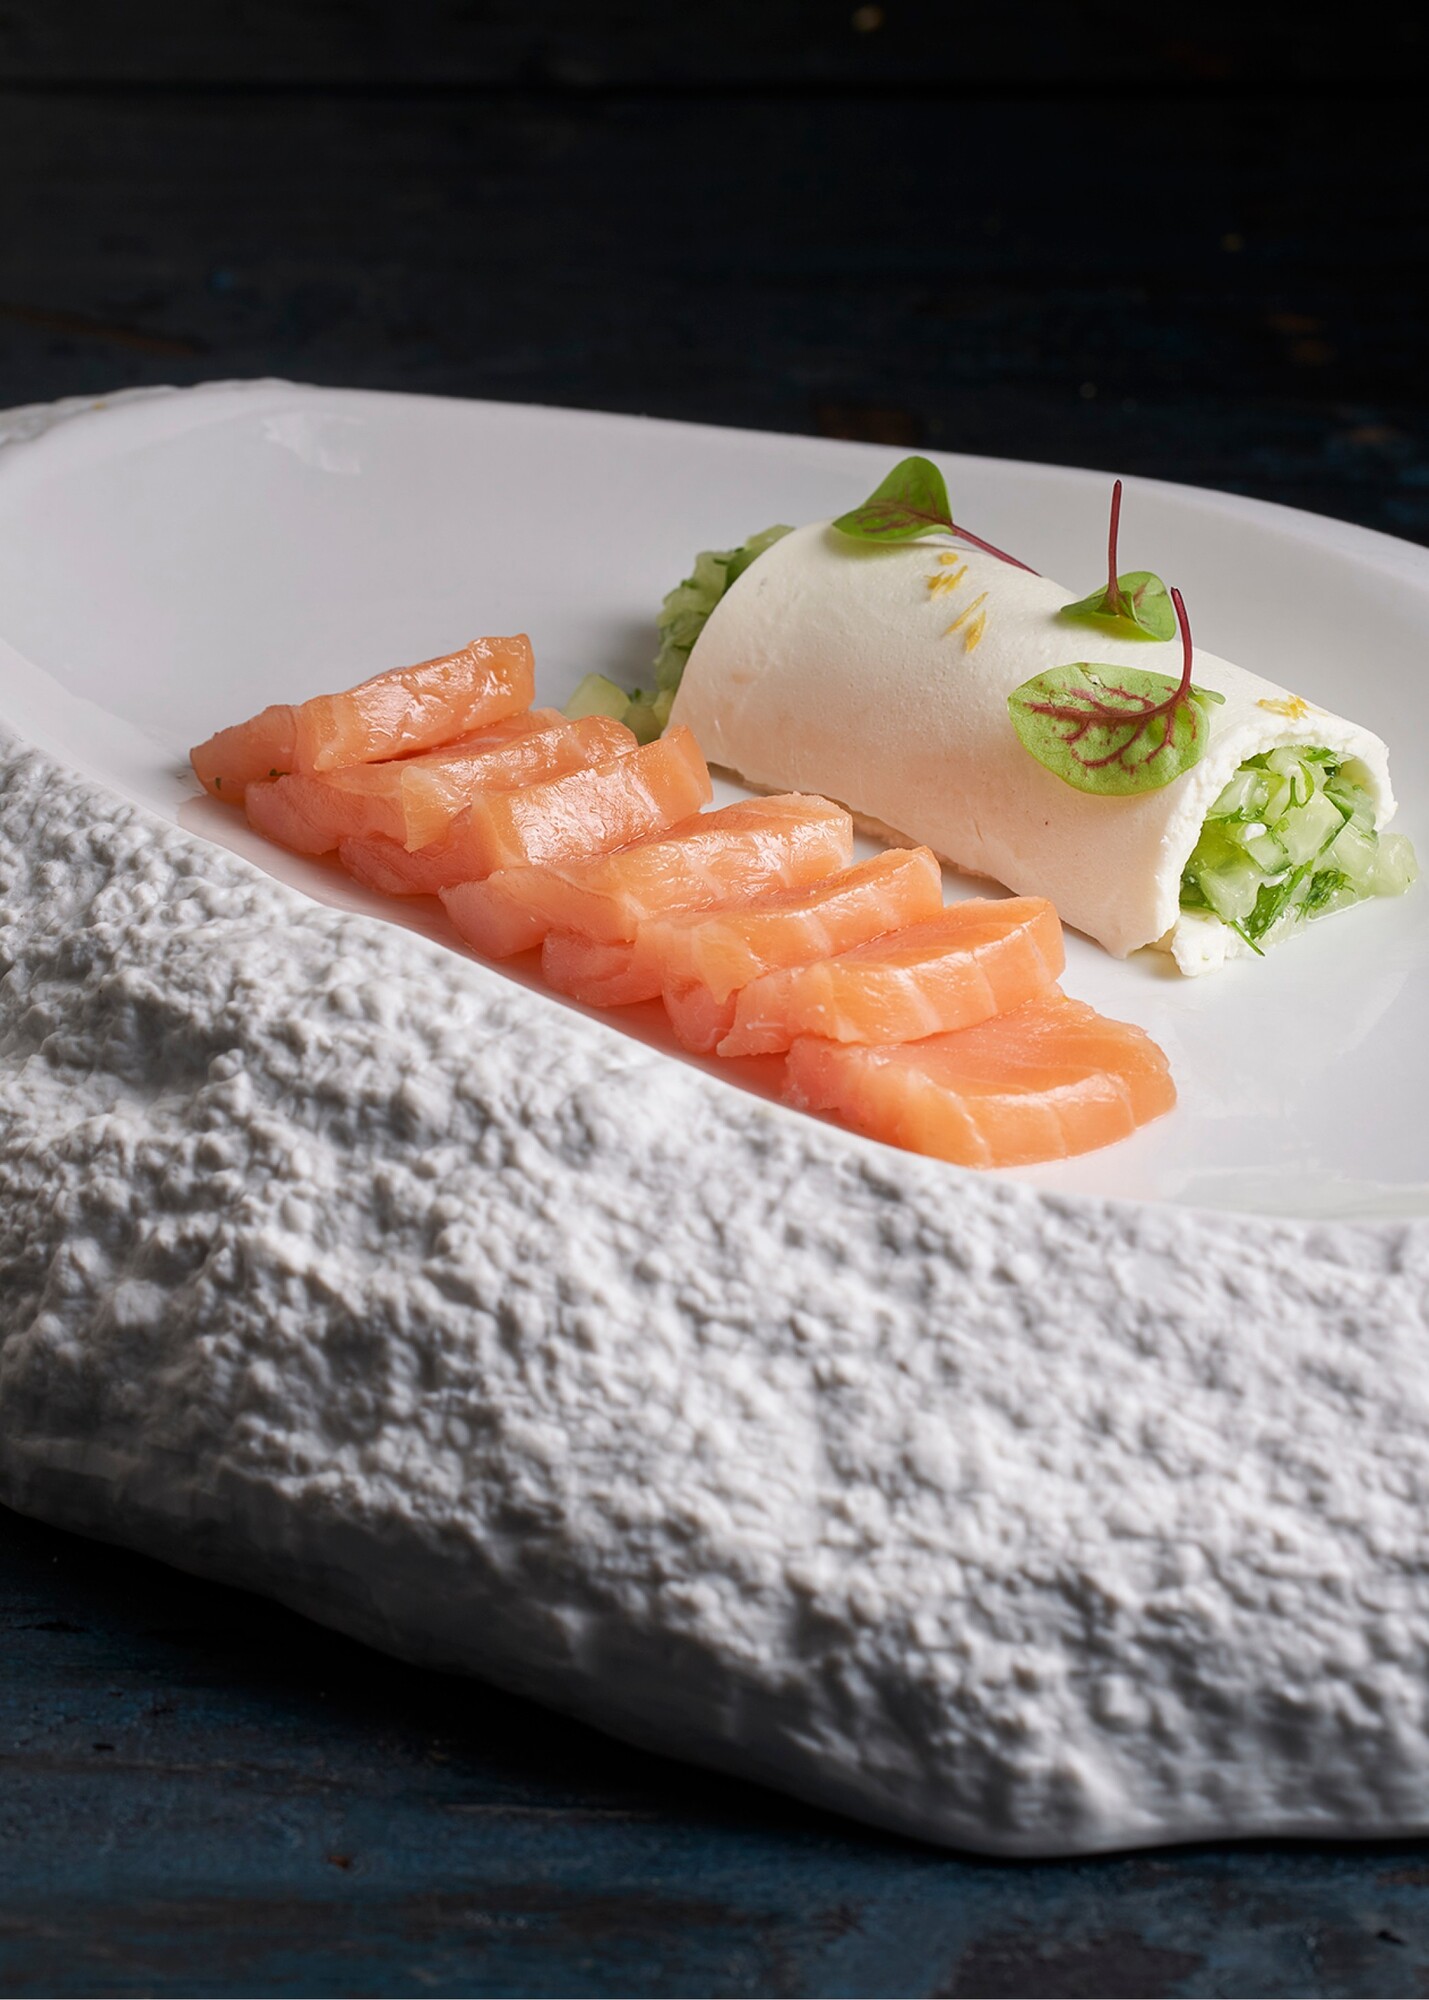 Cold-smoked salmon with sour cream textures